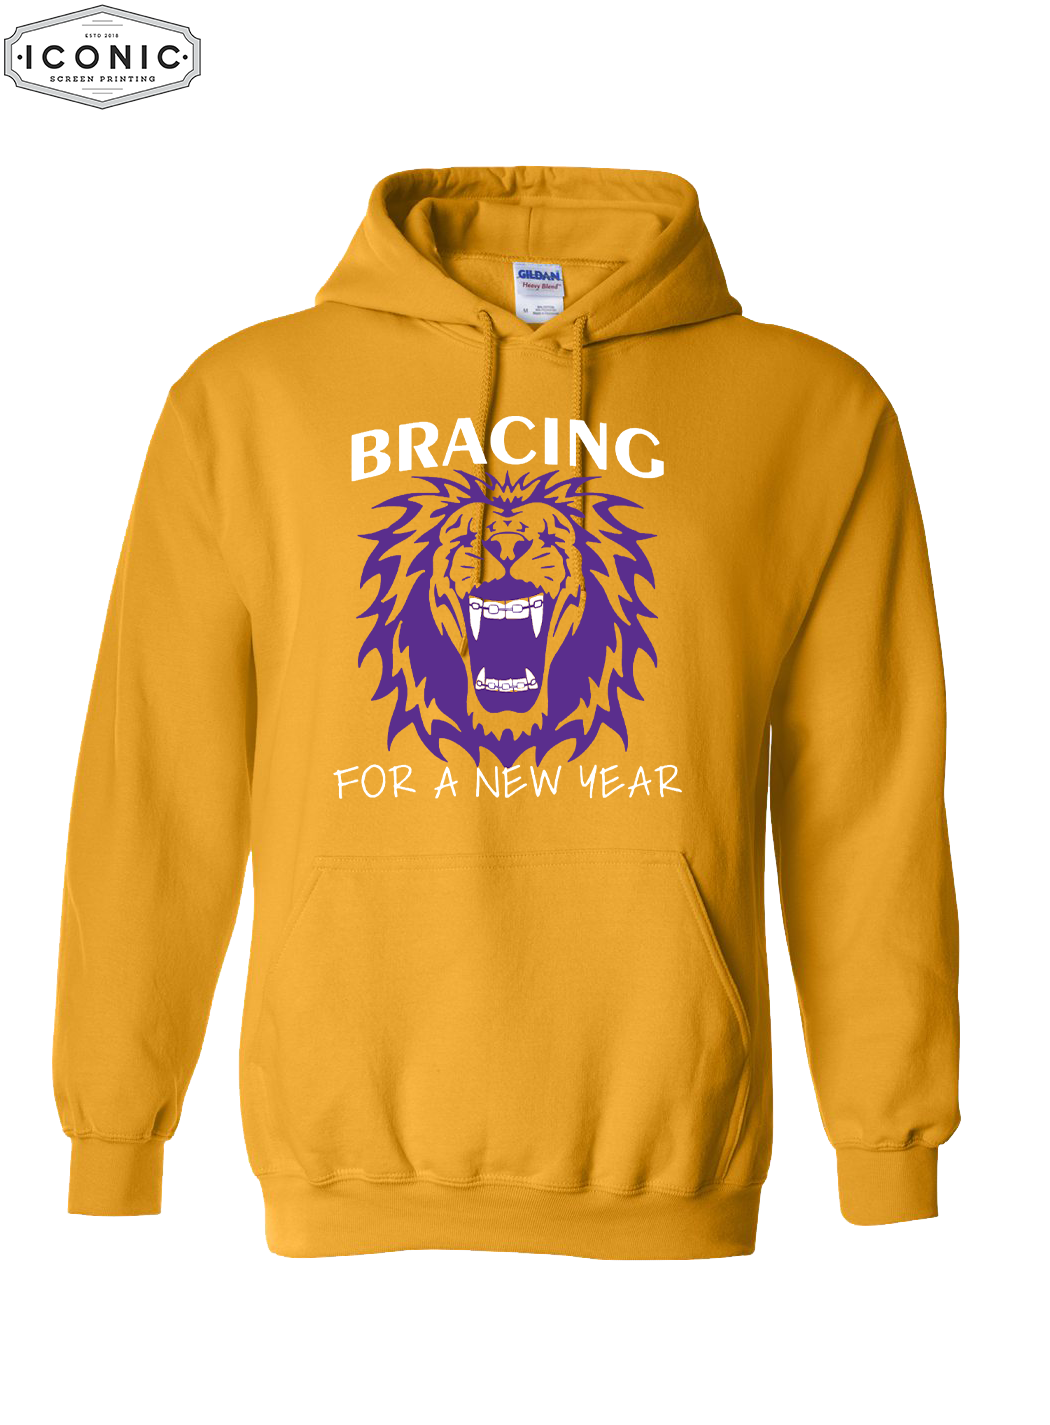 Bracing for a New Year - D4 - Heavy Blend Hooded Sweatshirt